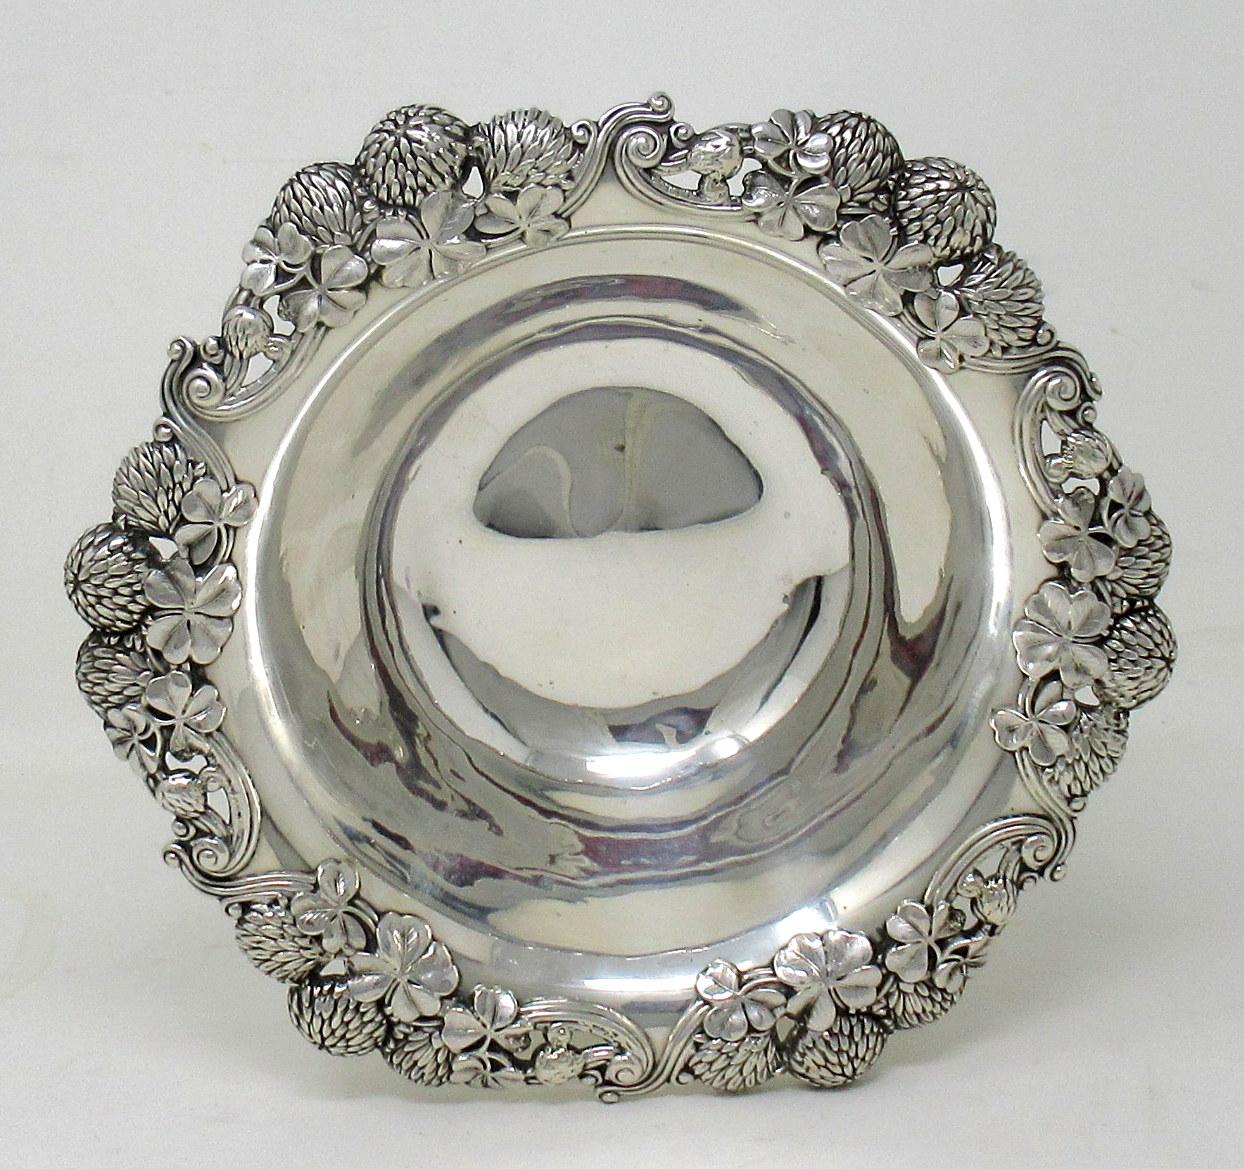 Stylish Art Nouveau American Sterling Silver heavy gauge circular Centerpiece, Fruit Bowl of outstanding quality and generous size. Last quarter of the Nineteenth Century. Made by one of the most famous Silversmiths of all time Tiffany & Company